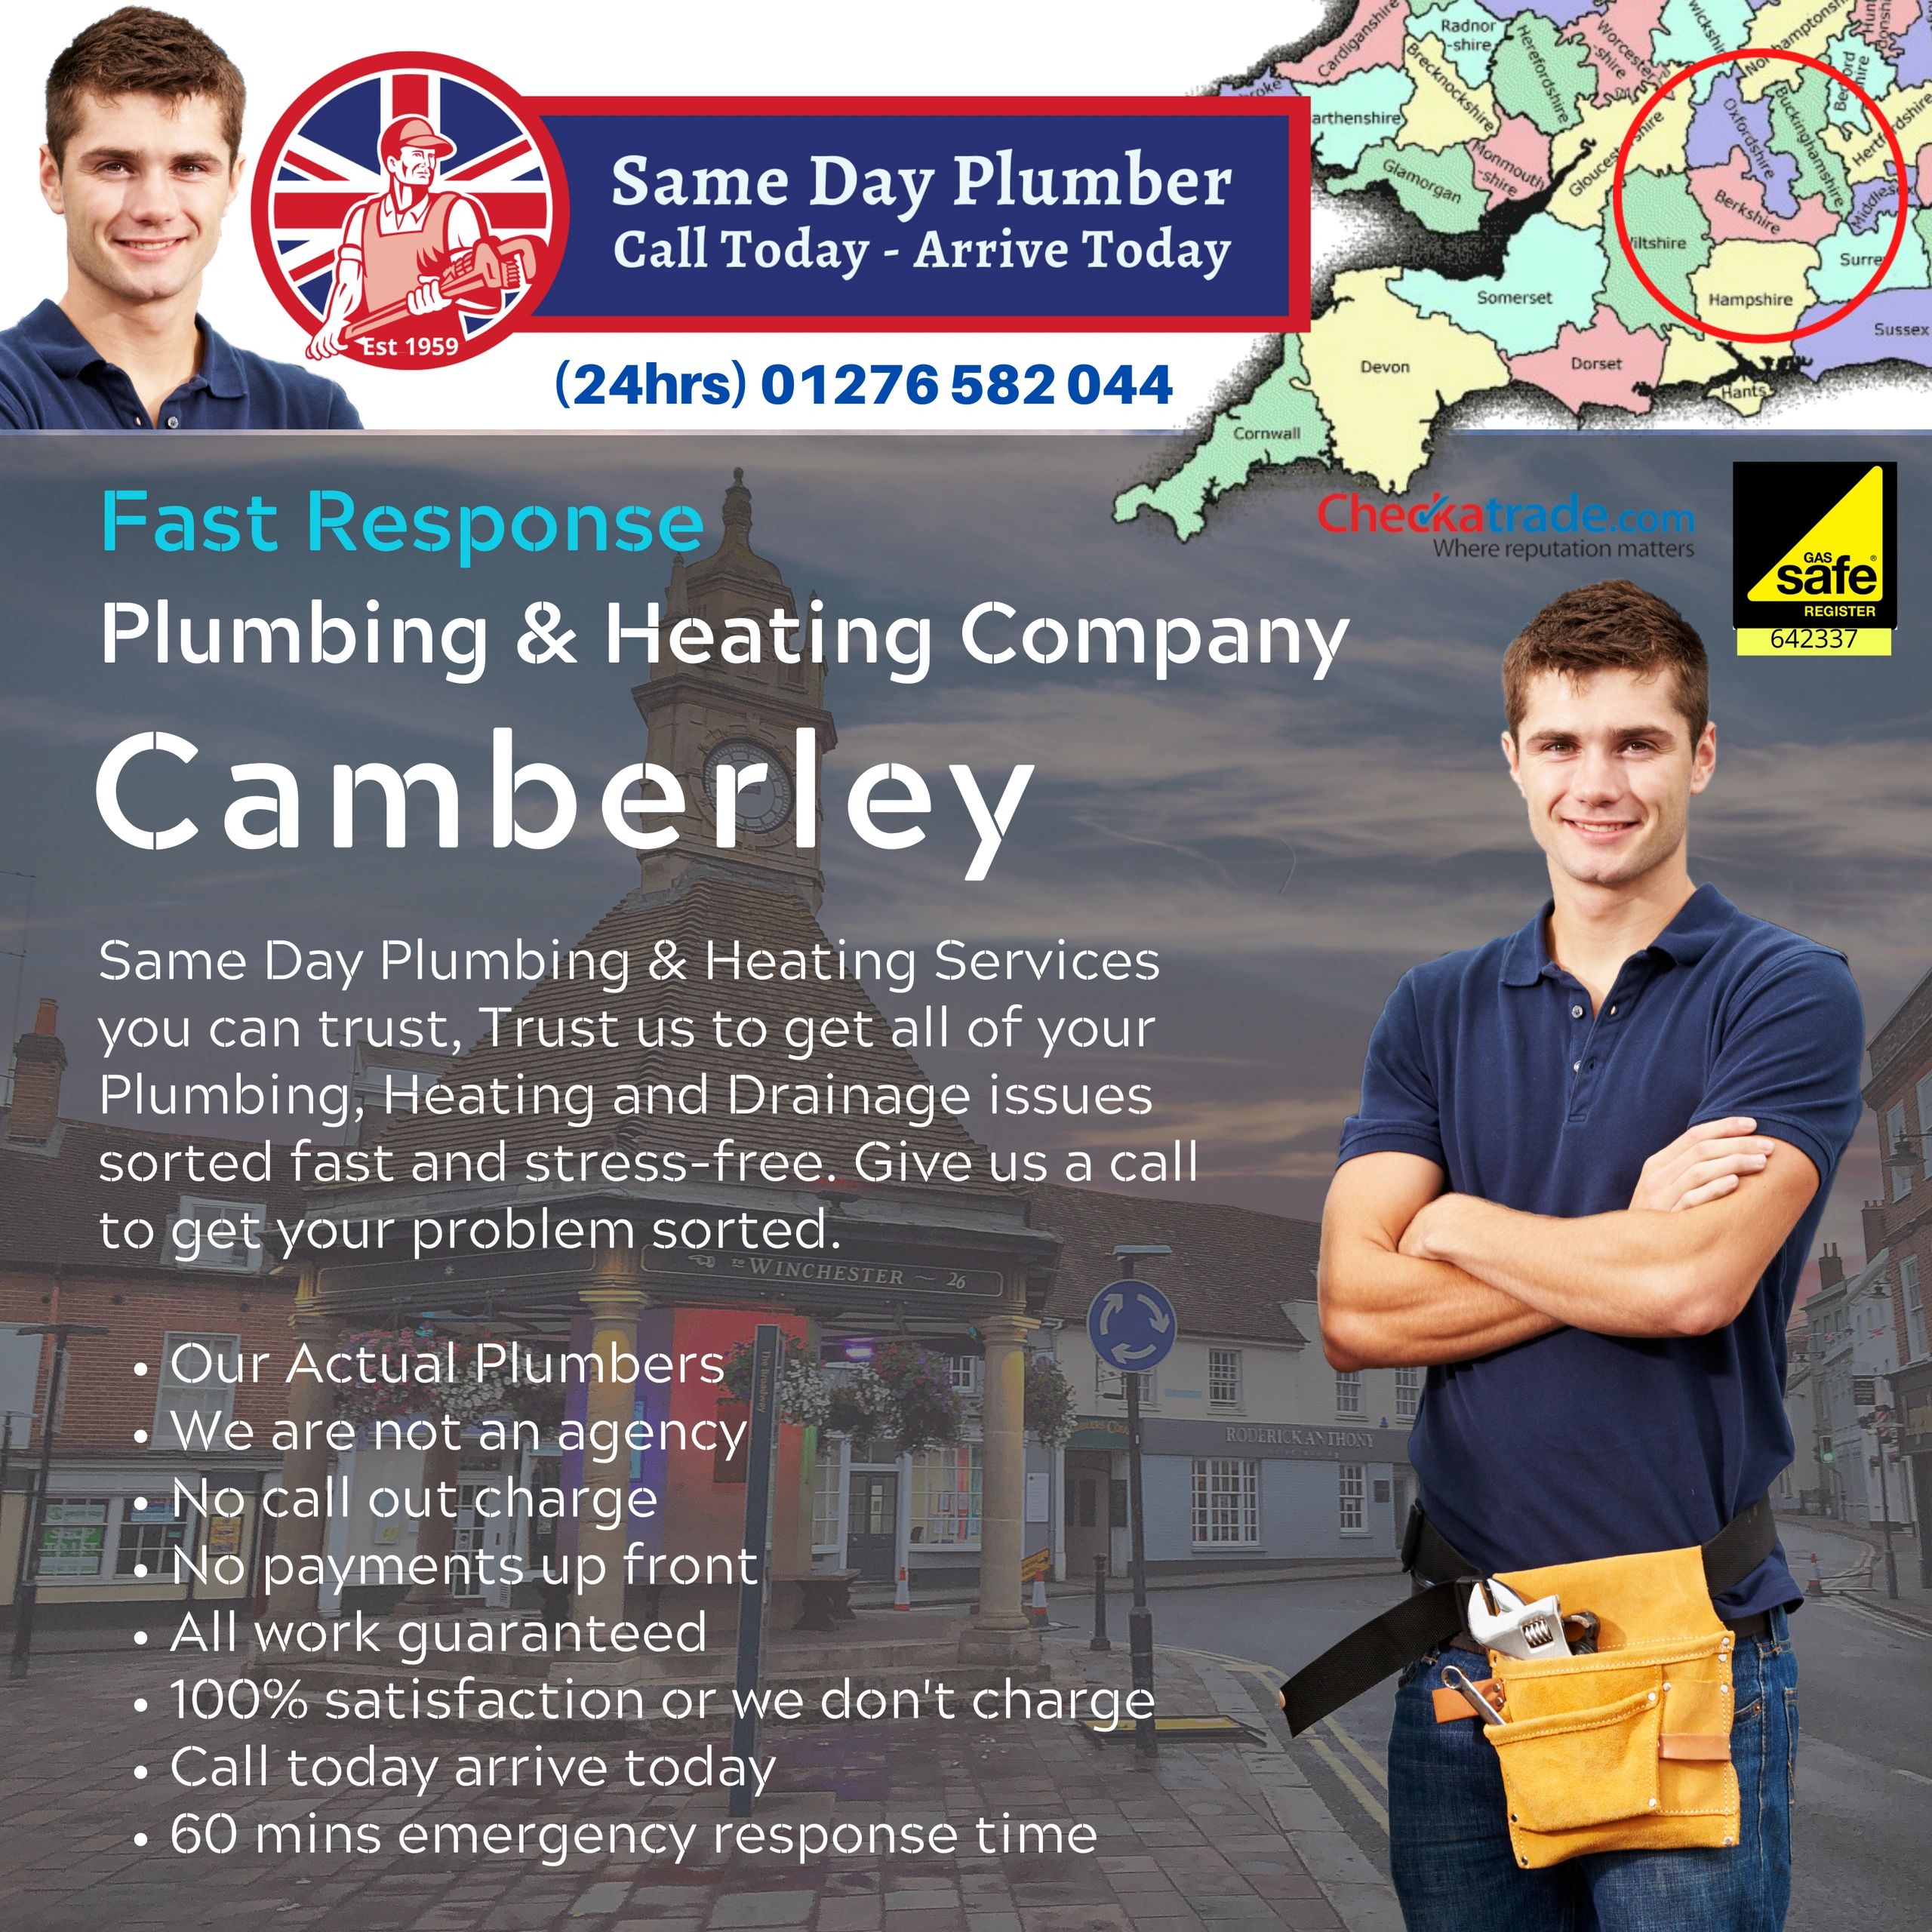 WELCOME TO SAME DAY PLUMBER IN CAMBERLEY 